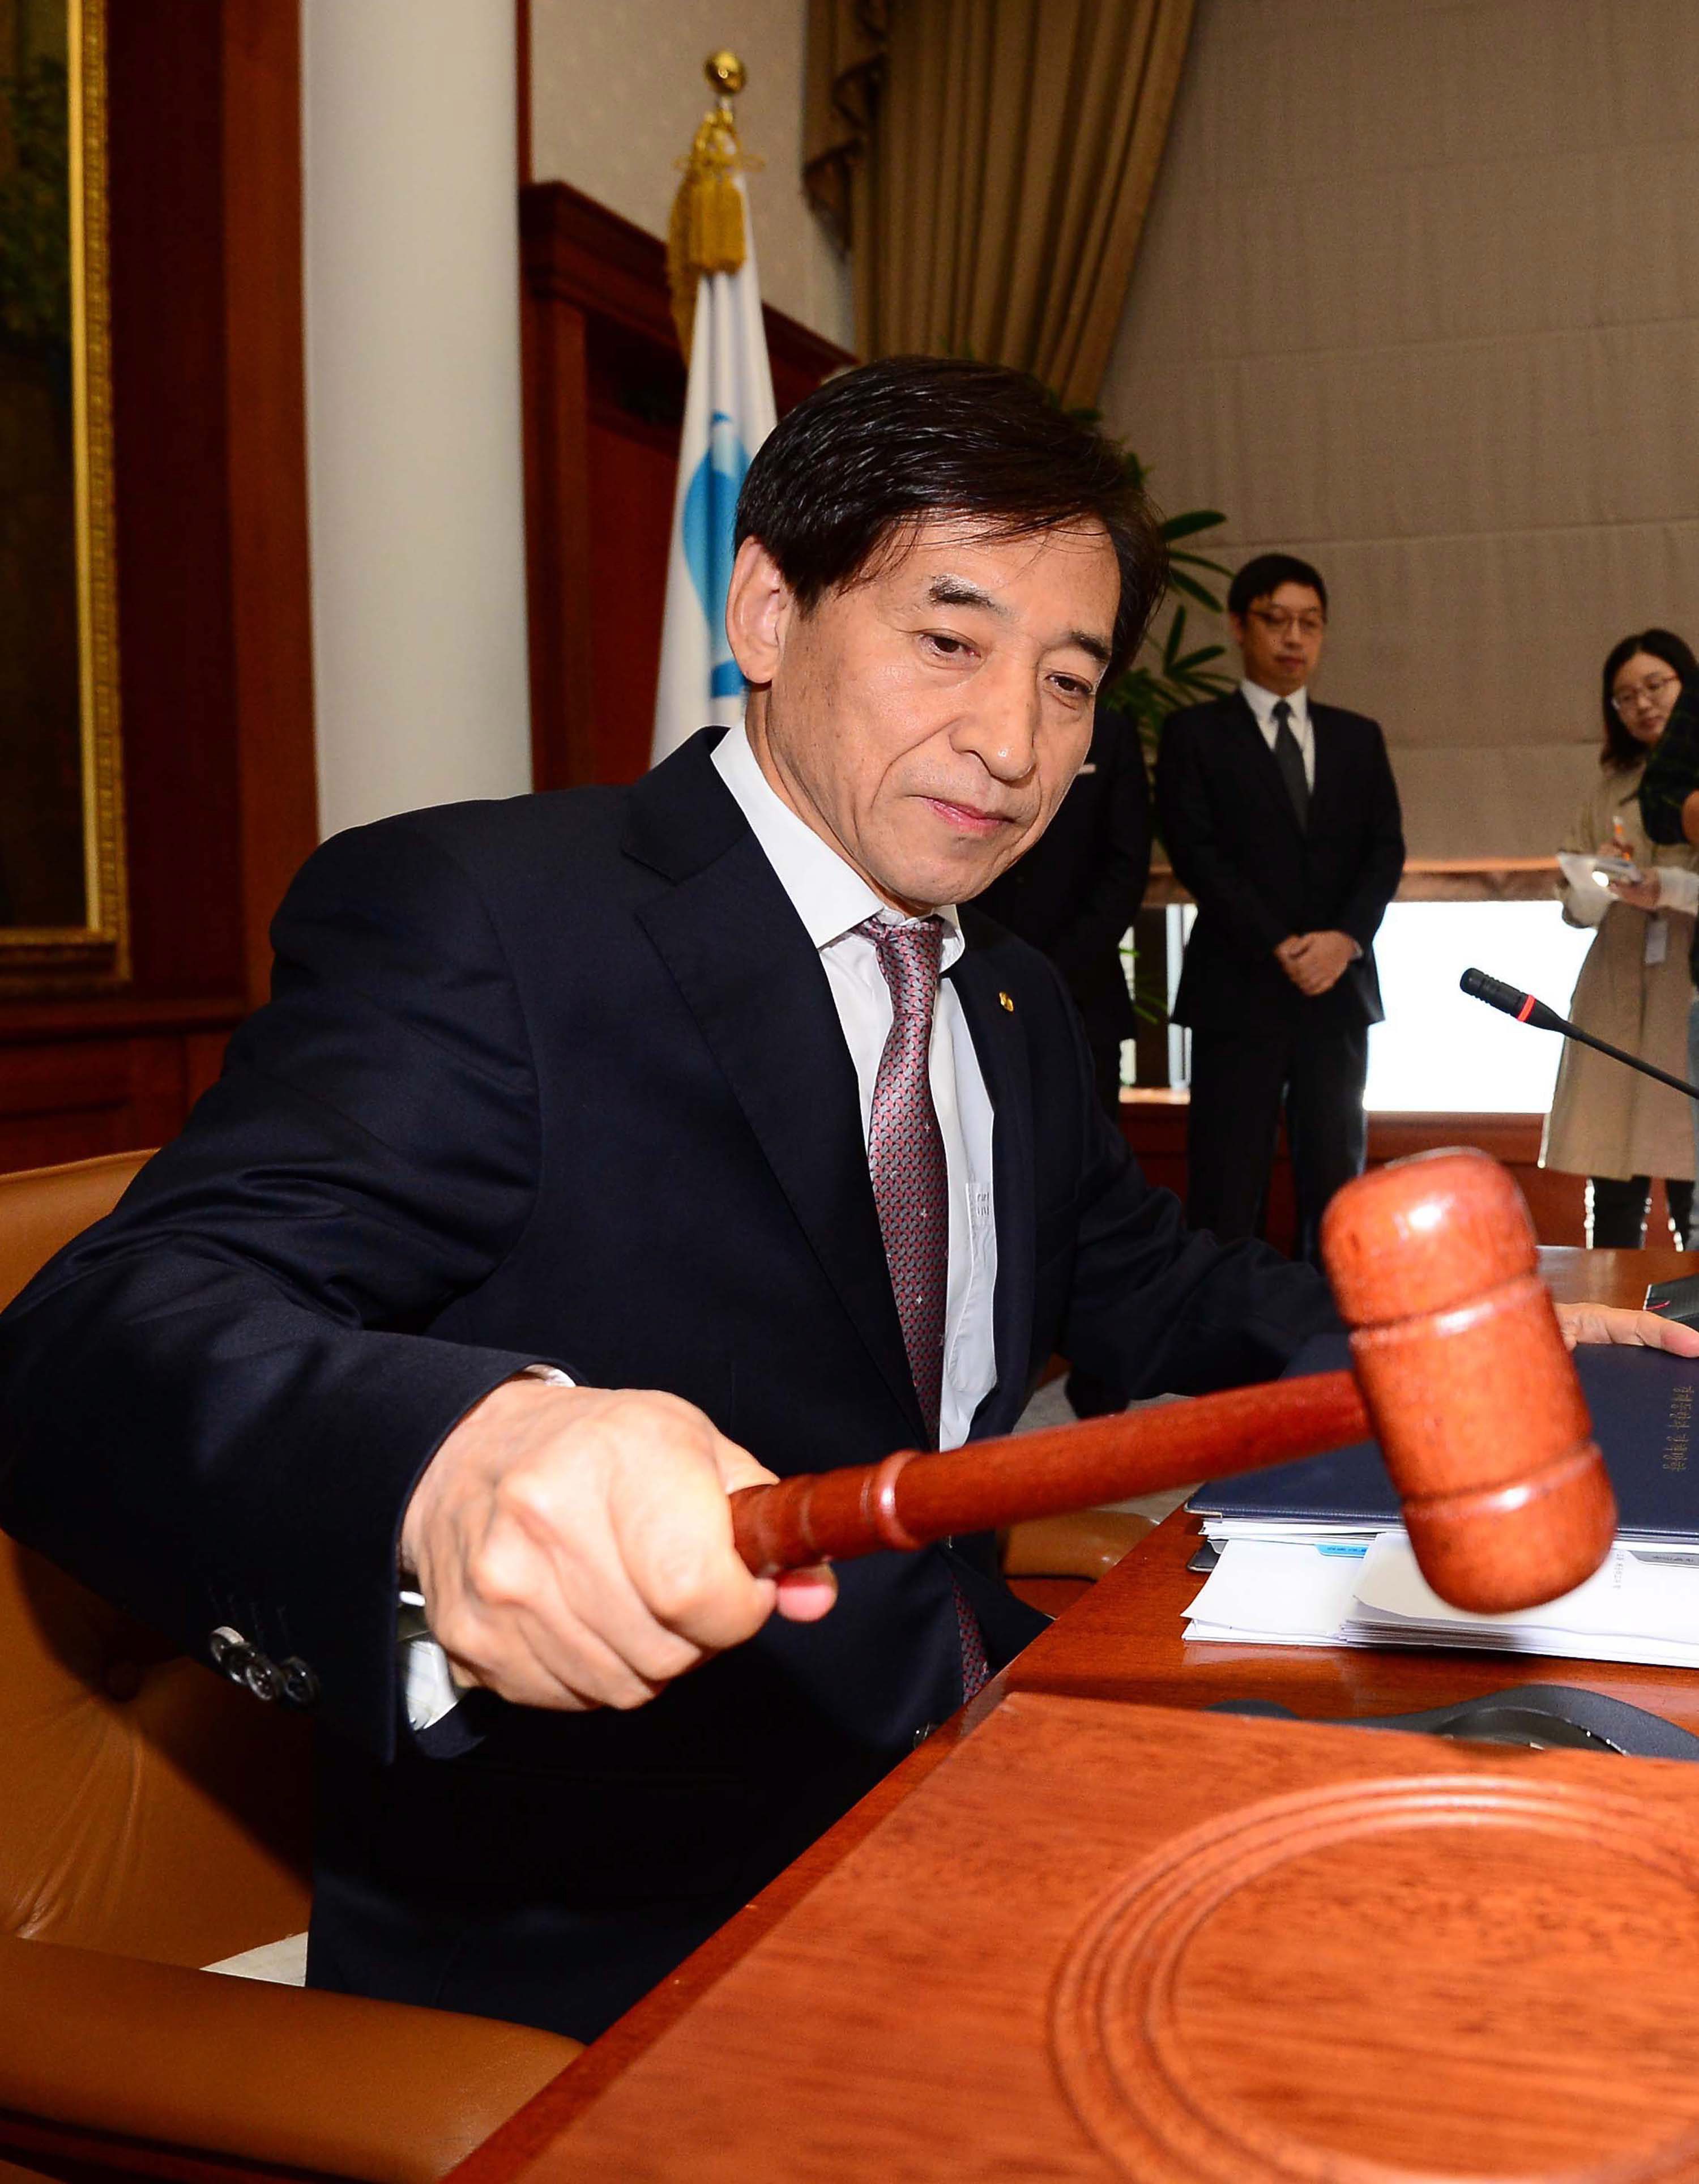 epa04977762 Bank of Korea (BOK) Governor Lee Ju-yeol bangs the gavel to open a monthly rate-setting meeting at the central bank's headquarters in Seoul, South Korea, 15 October 2015. The BOK Monetary Policy Committee left the benchmark policy rate steady at 1.5 percent, extending its wait-and-see mode for another month amid growing uncertainties from the world's two largest economies. EPA/YONHAP SOUTH KOREA OUT